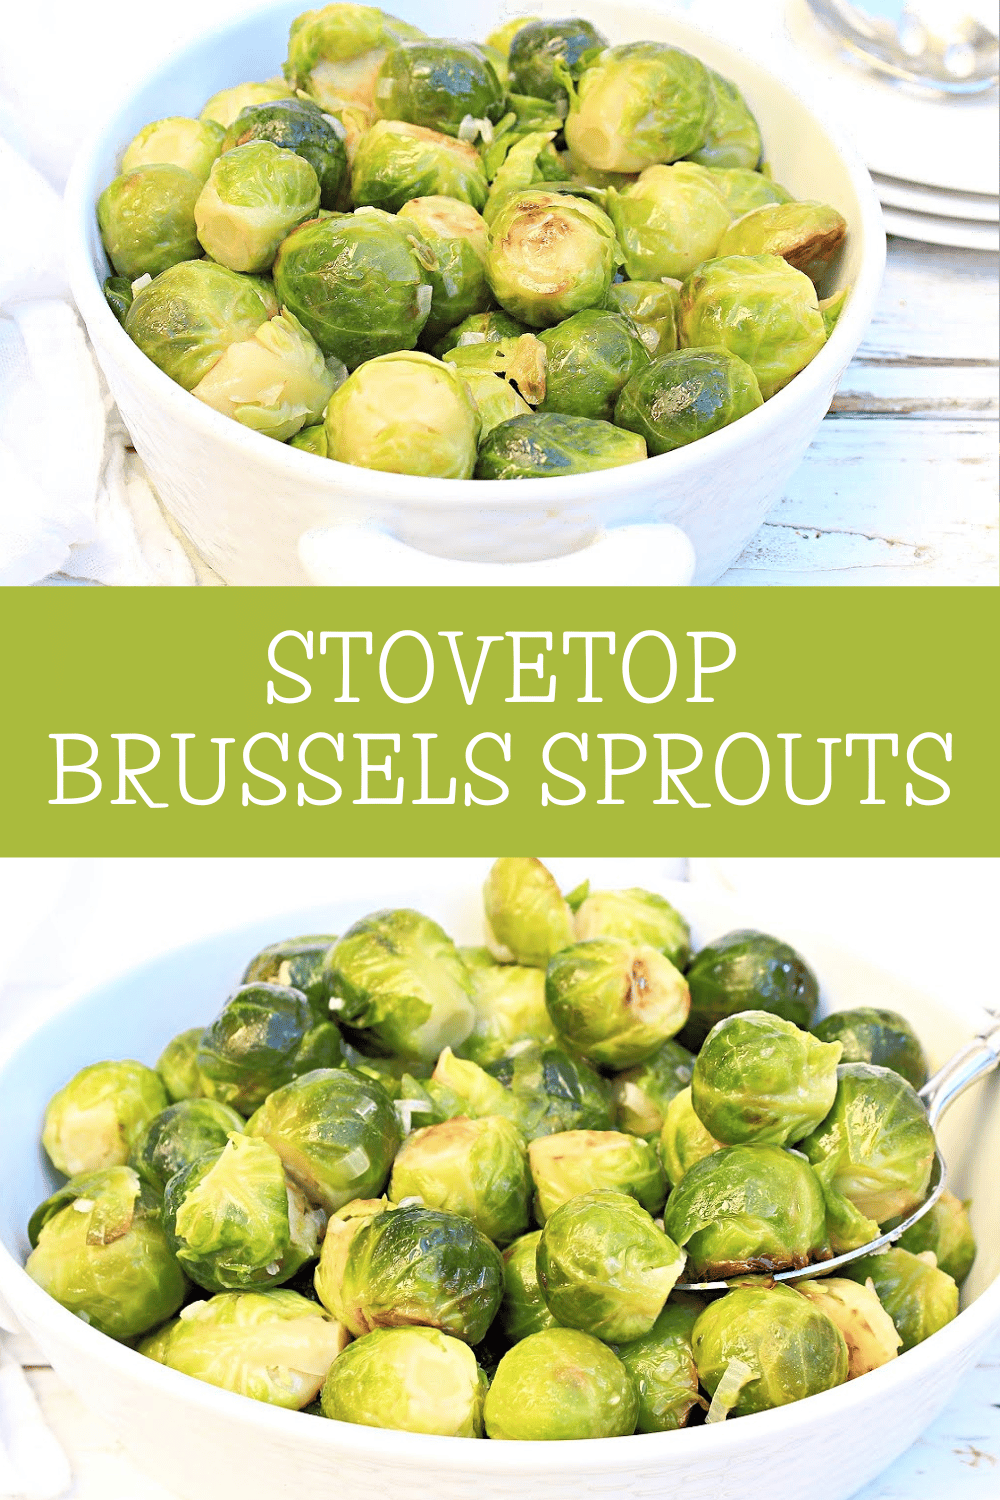 Stovetop Brussels Sprouts ~ Pan-fried Brussels sprouts simmered in a savory and buttery plant-based broth are easy, flavorful, and versatile! via @thiswifecooks